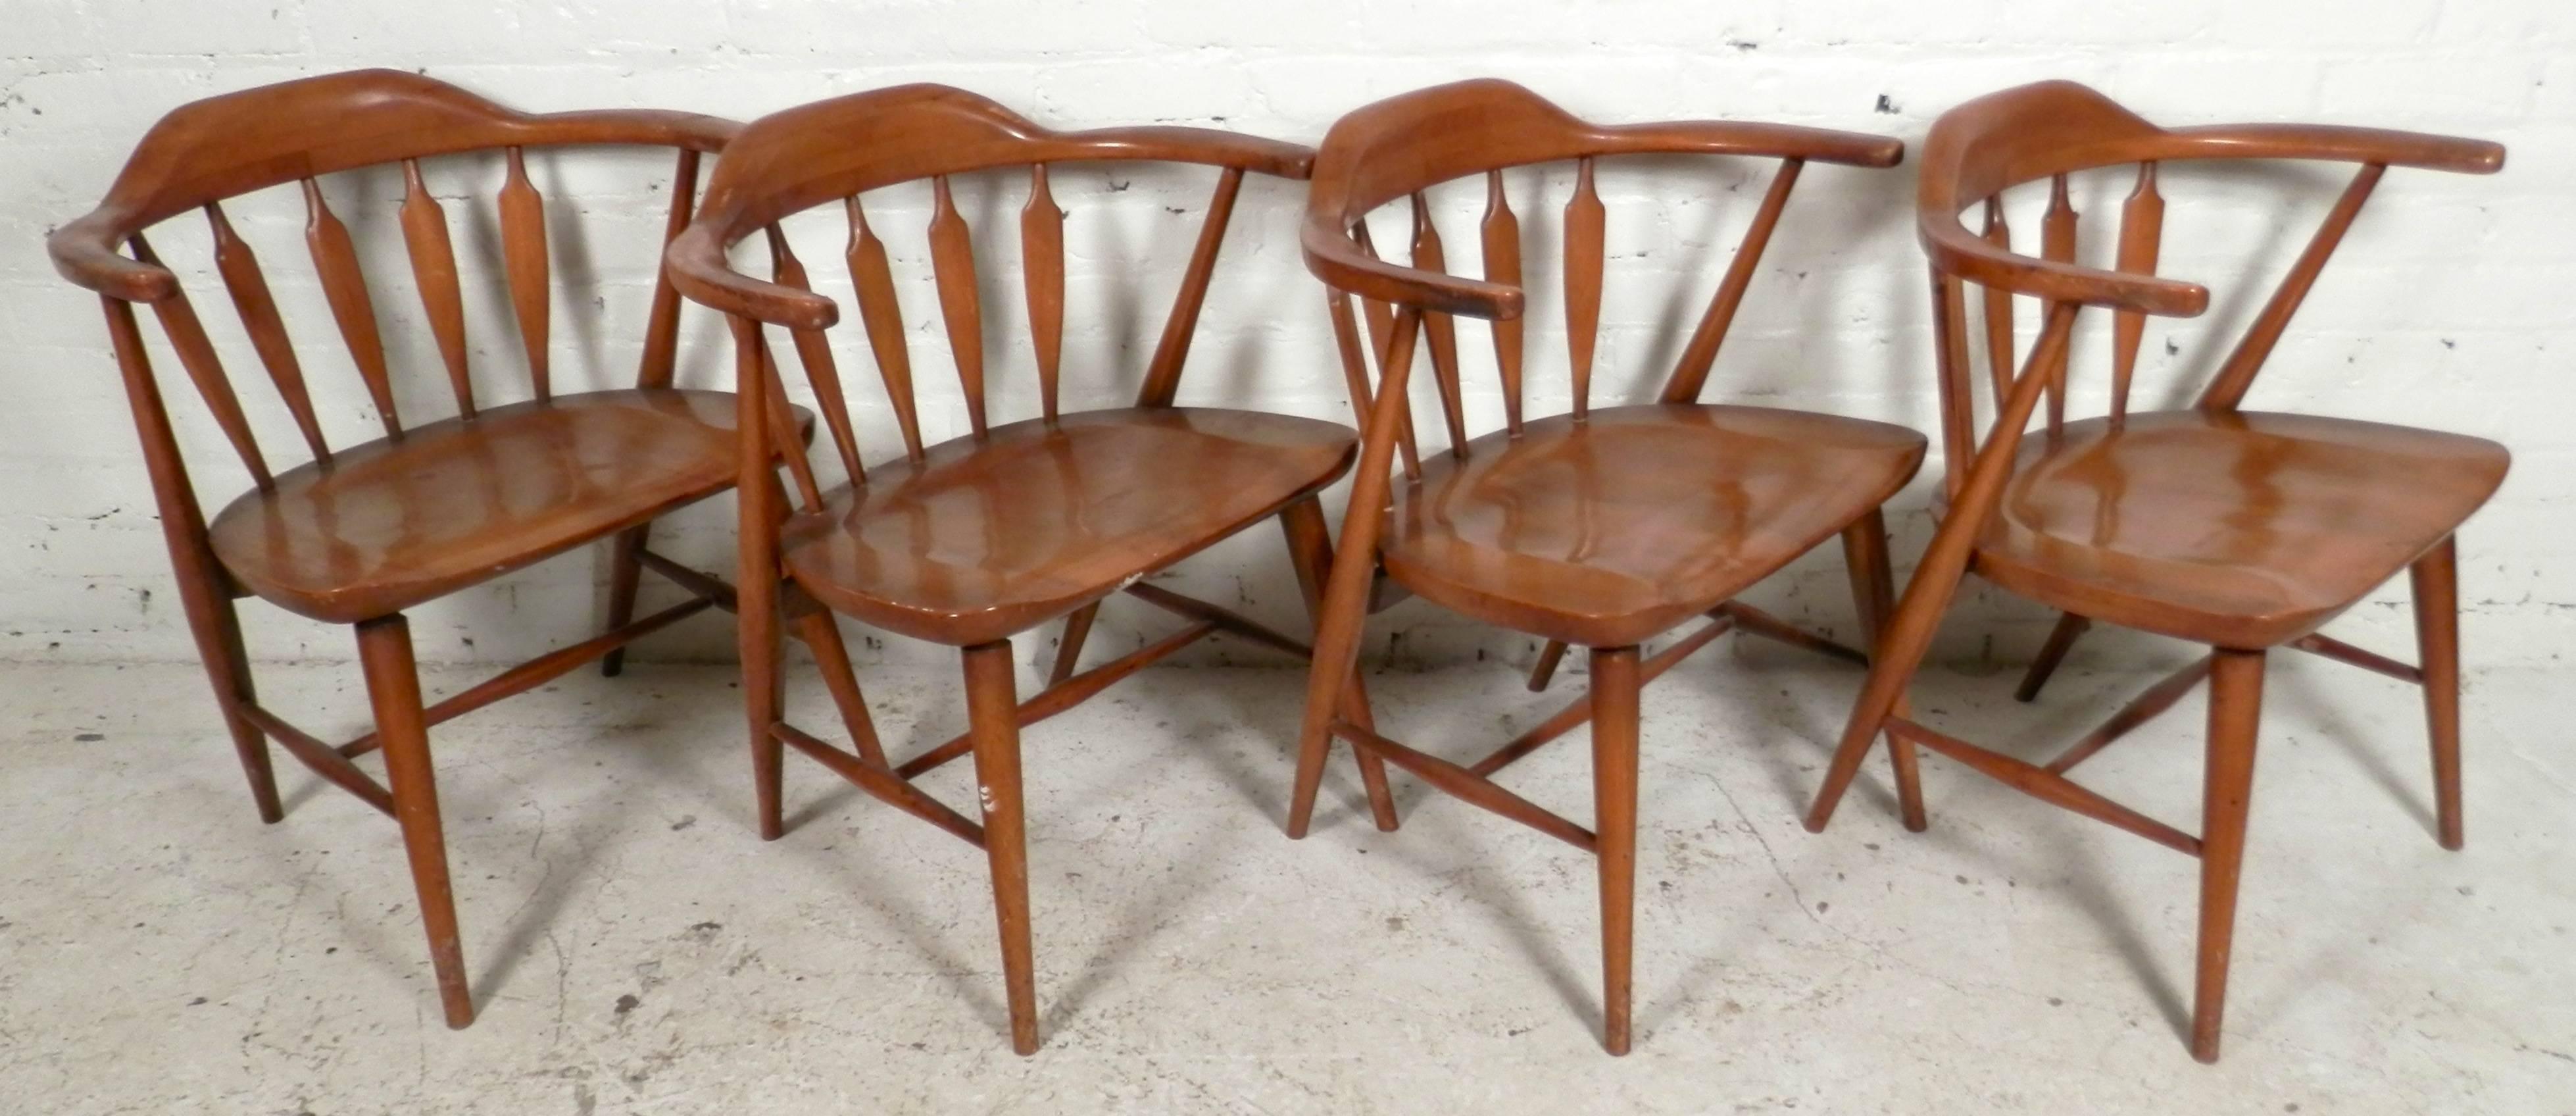 Four vintage round back ding chairs with slat backs. Comfortable shovel seats, tapered legs and slanting back legs. 

(Please confirm item location, NY or NJ, with dealer)
 